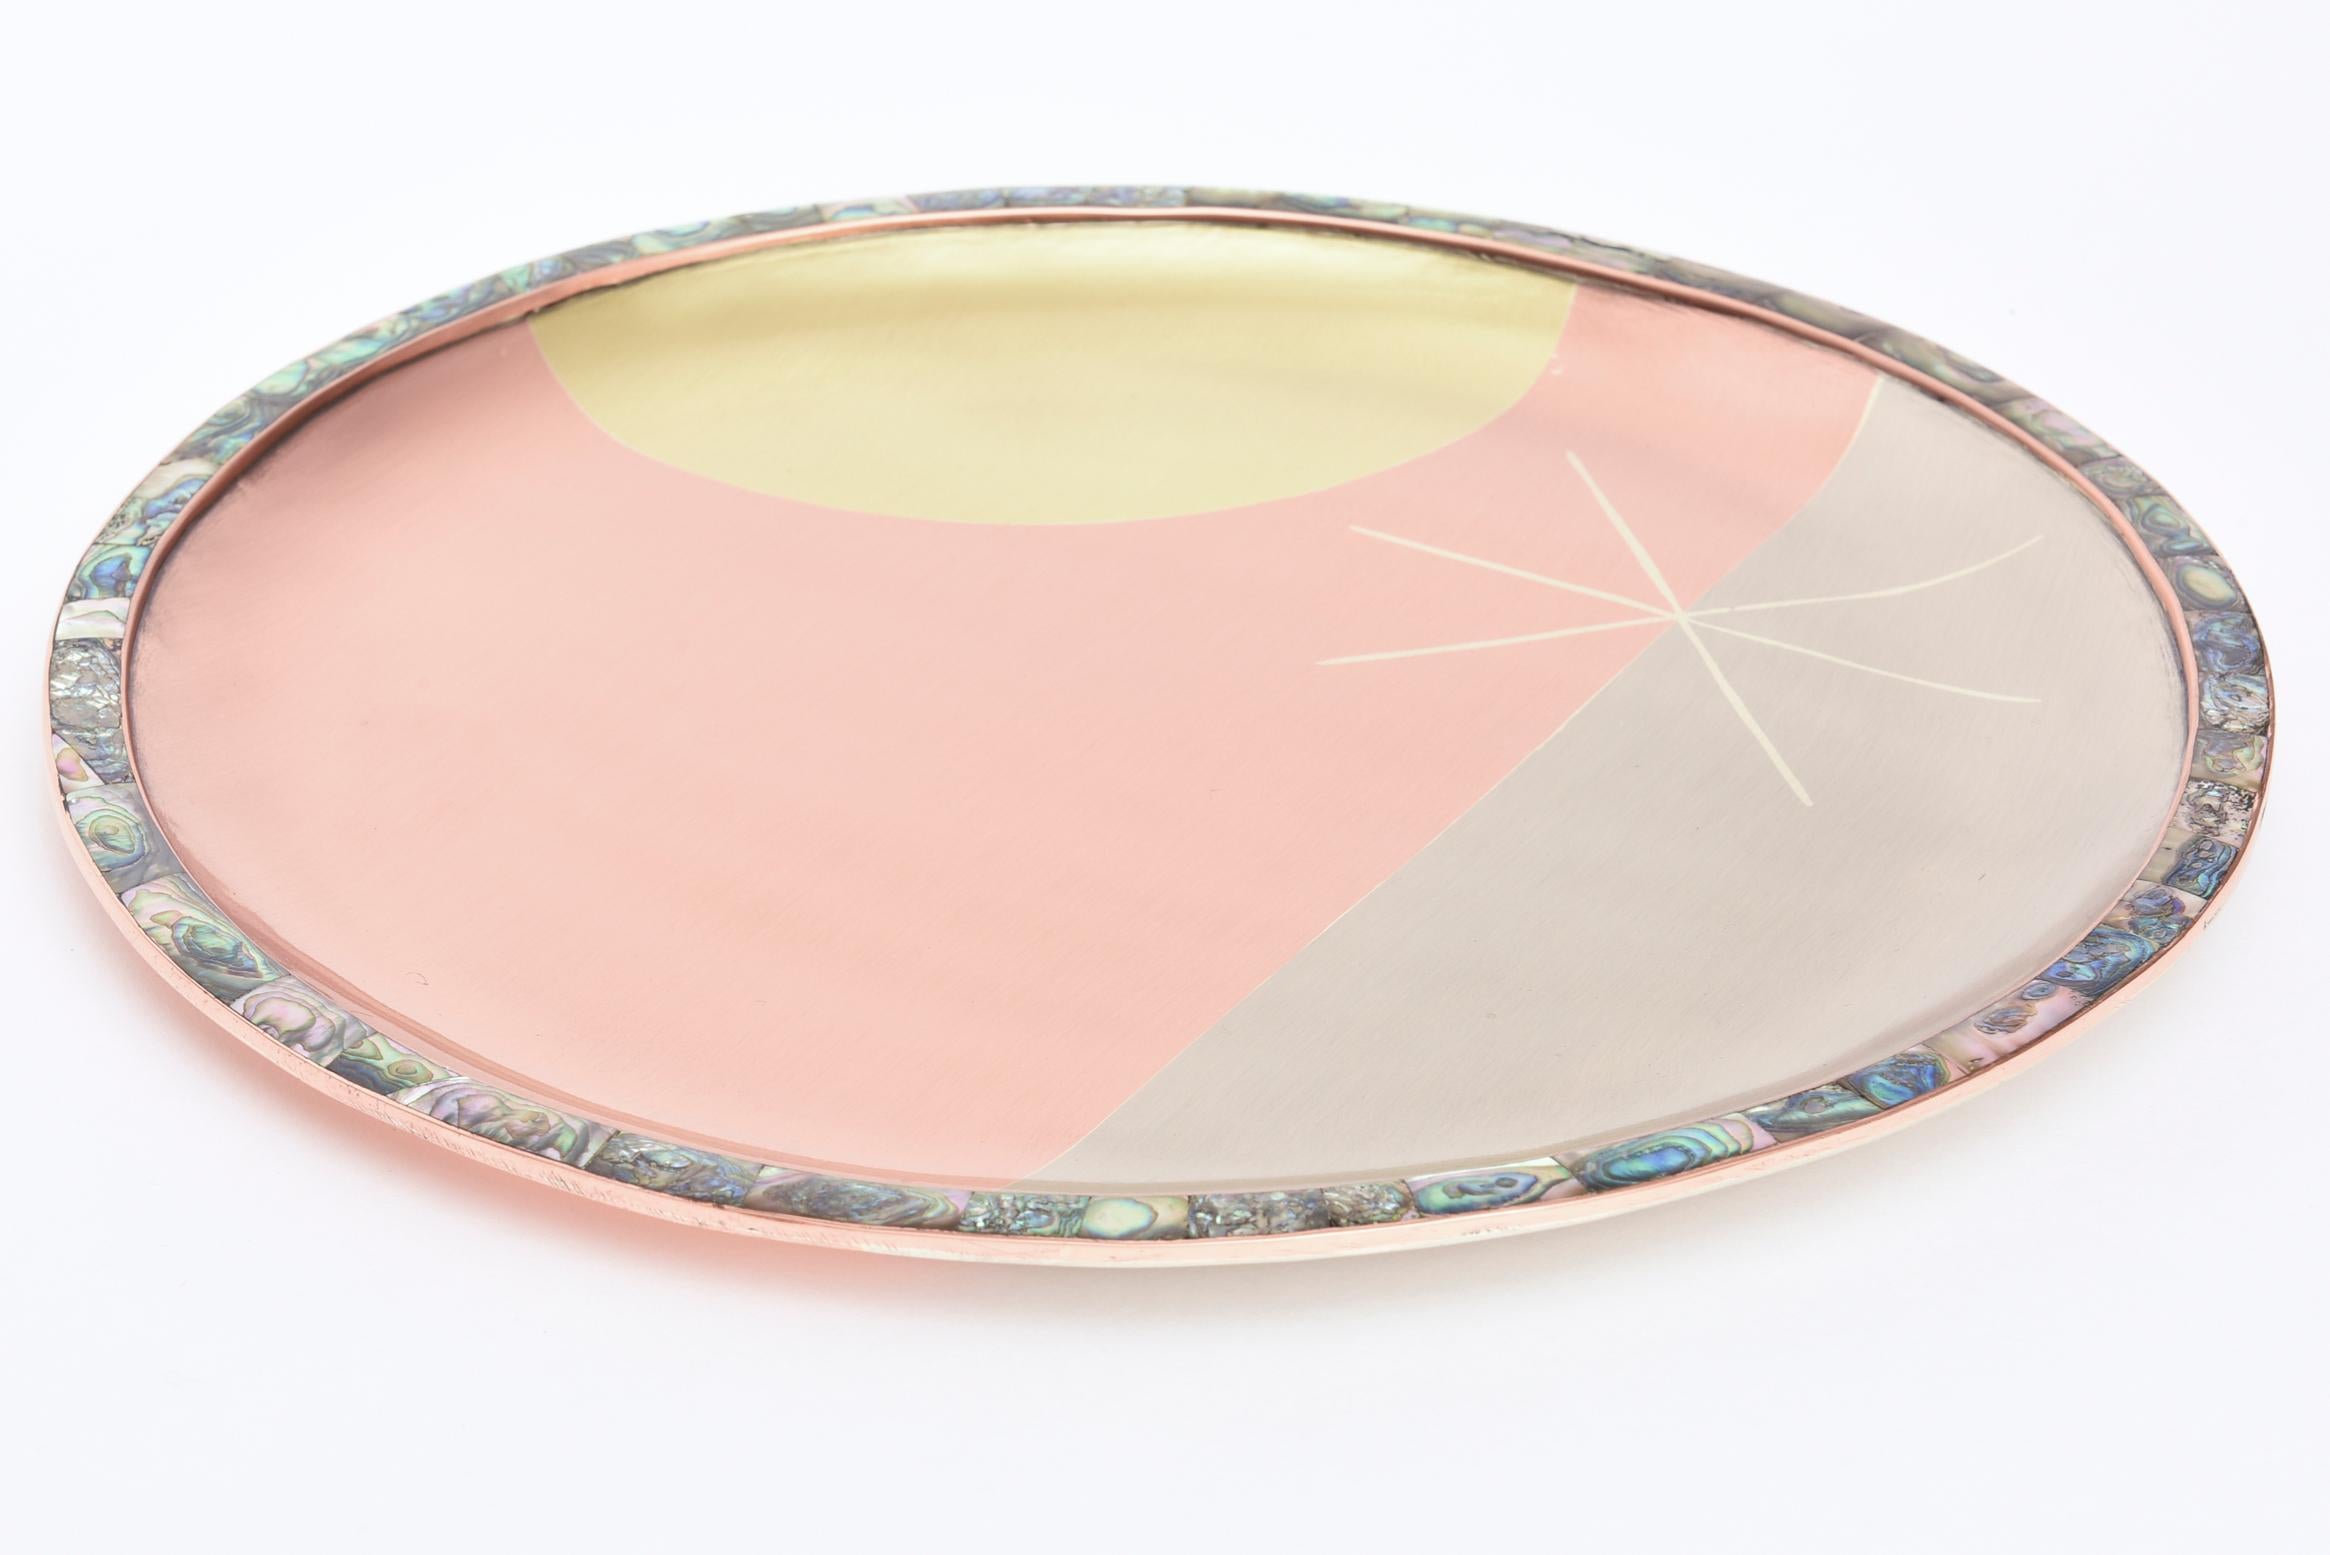 This lovely Mid-Century Modern mixed metal signed round tray is a combination of brushed brass, copper, silver and sterling silver as the star surrounded by a mosaic of beautiful abalone as the perimeter. It is hallmarked on the back E. Cabella C.A.